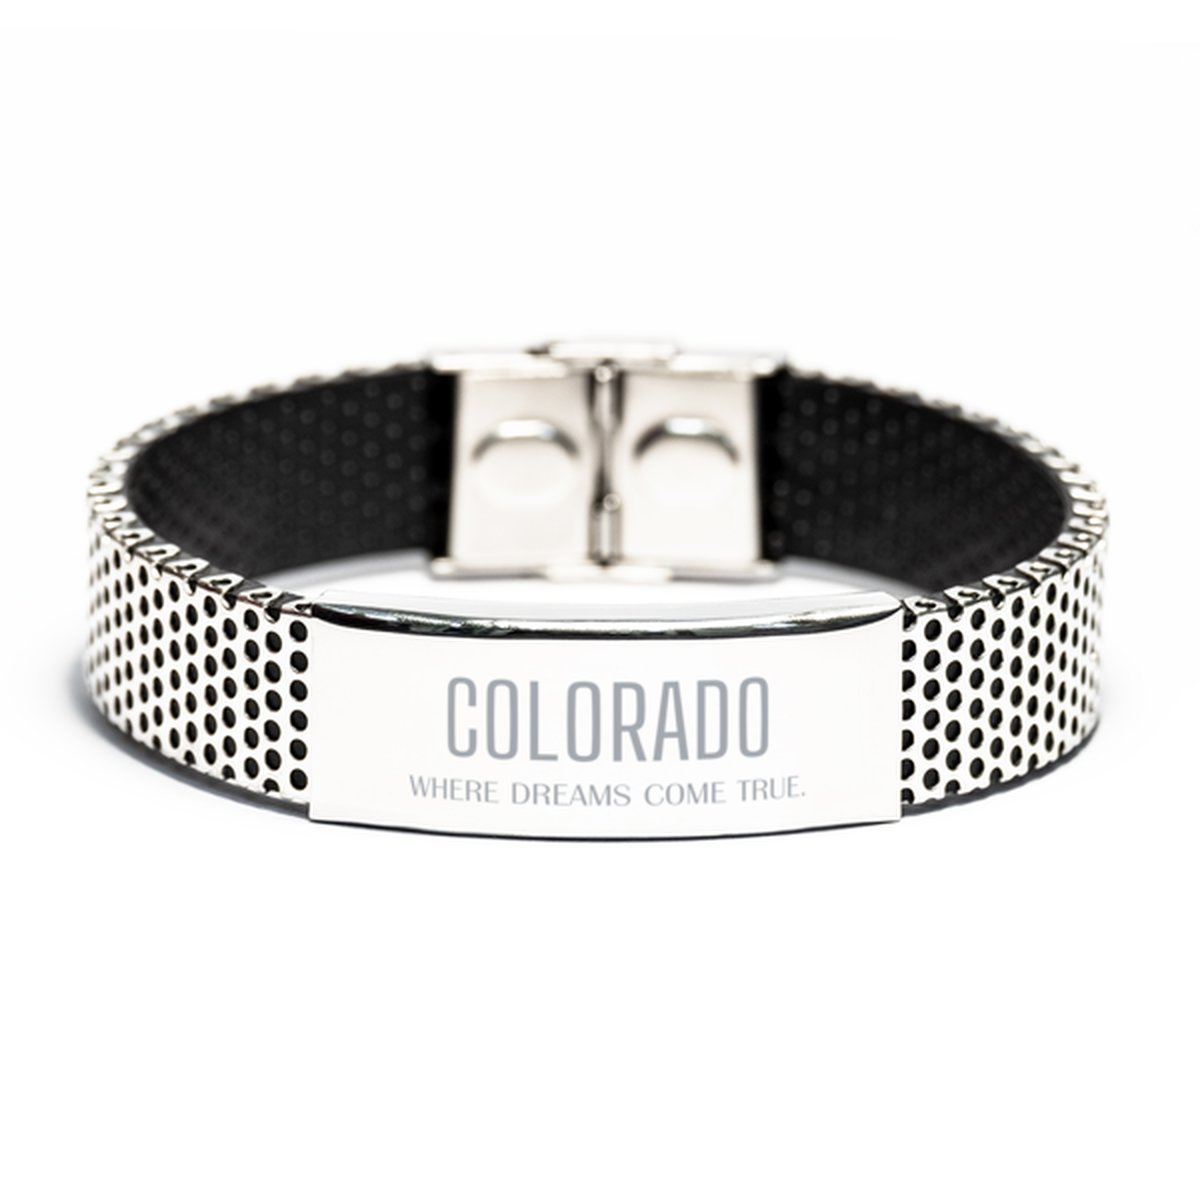 Love Colorado State Stainless Steel Bracelet, Colorado Where dreams come true, Birthday Inspirational Gifts For Colorado Men, Women, Friends